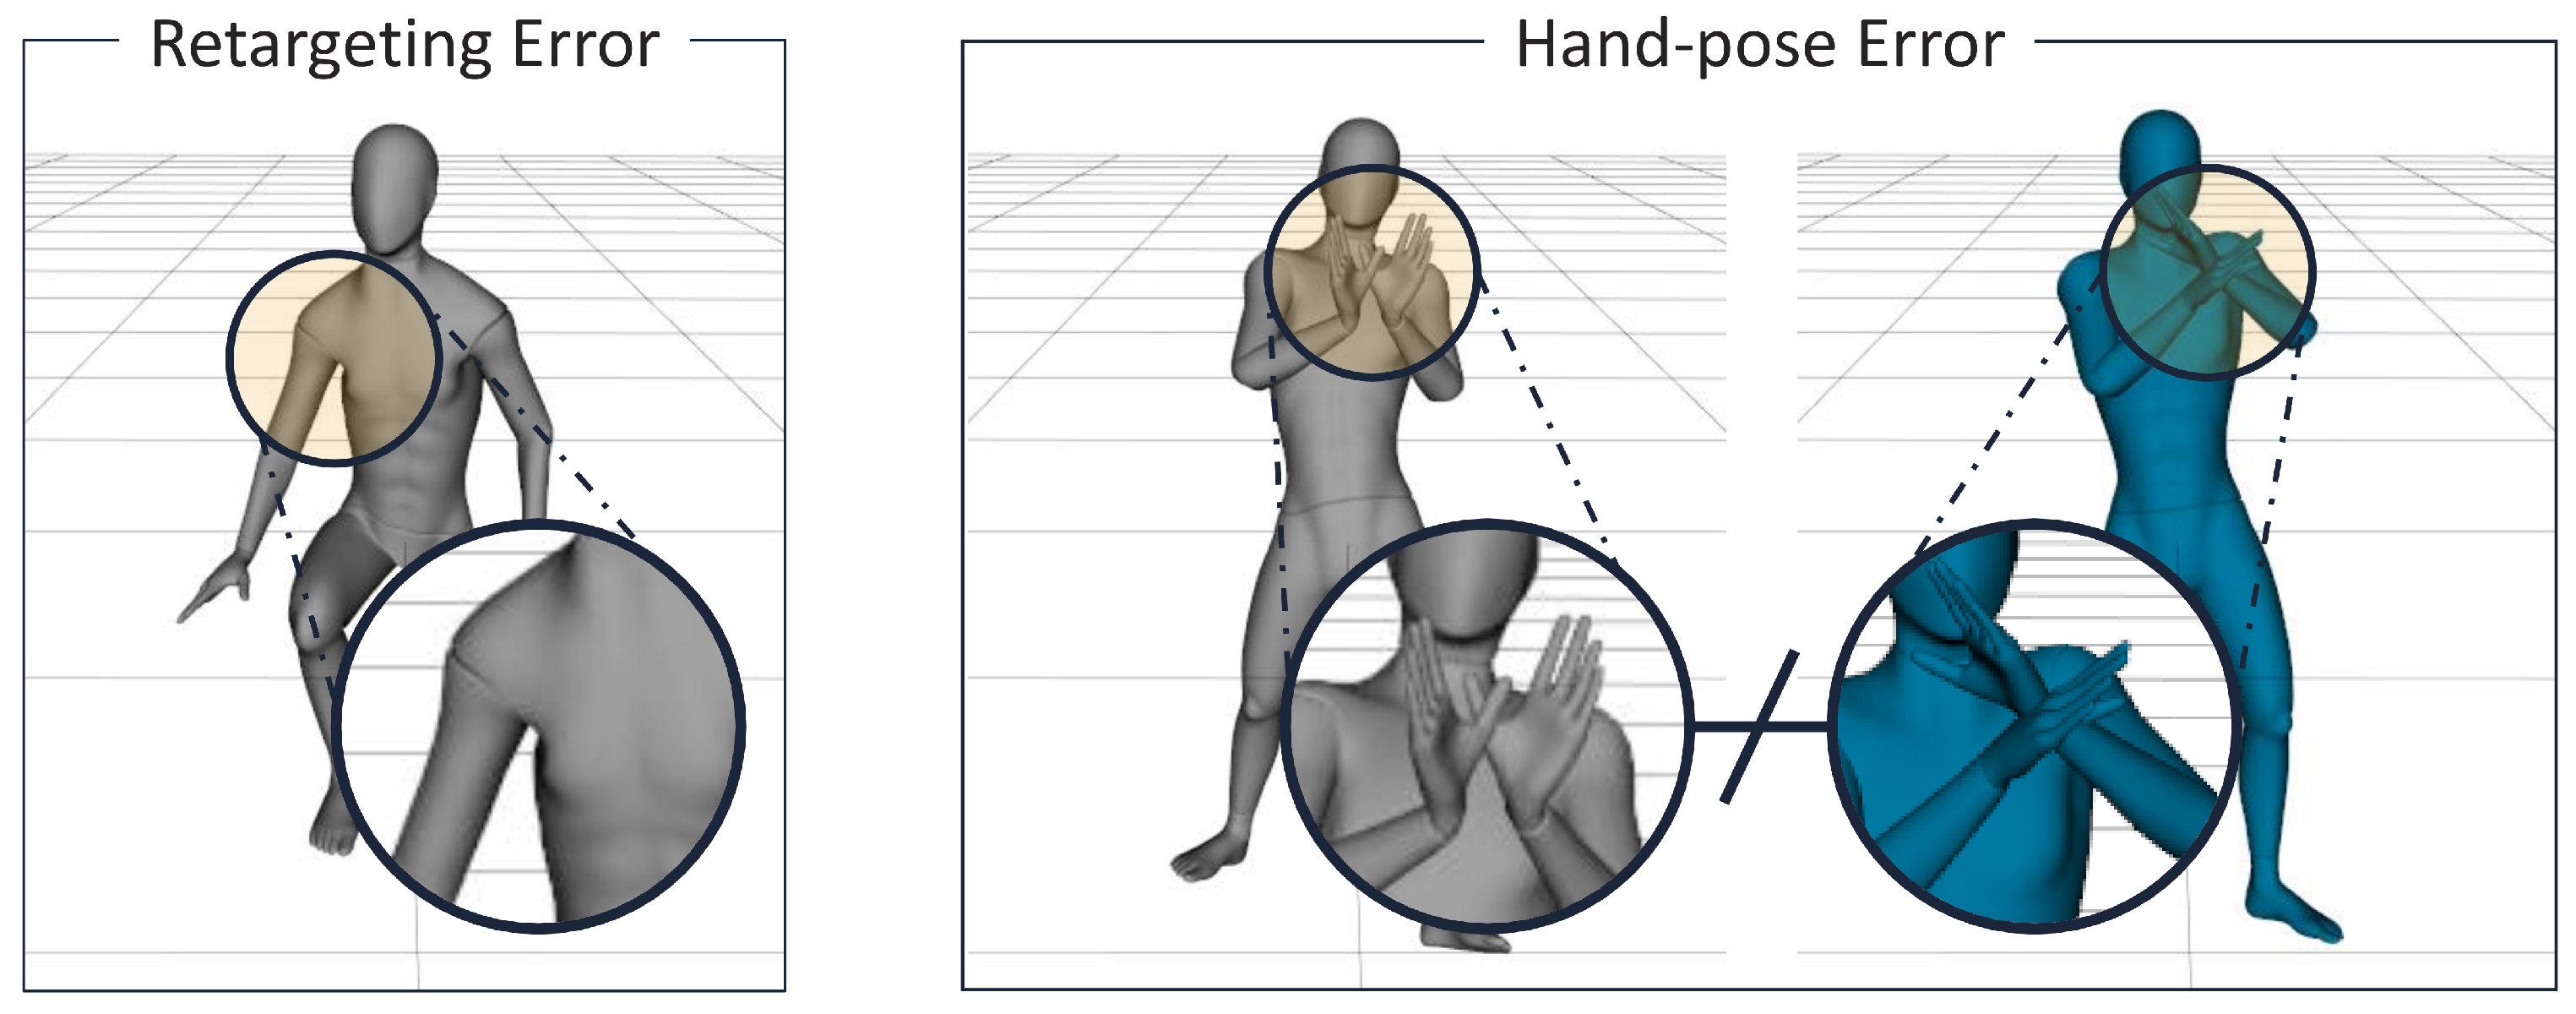 Residual Pose: A Decoupled Approach for Depth-Based 3D Human Pose Estimation